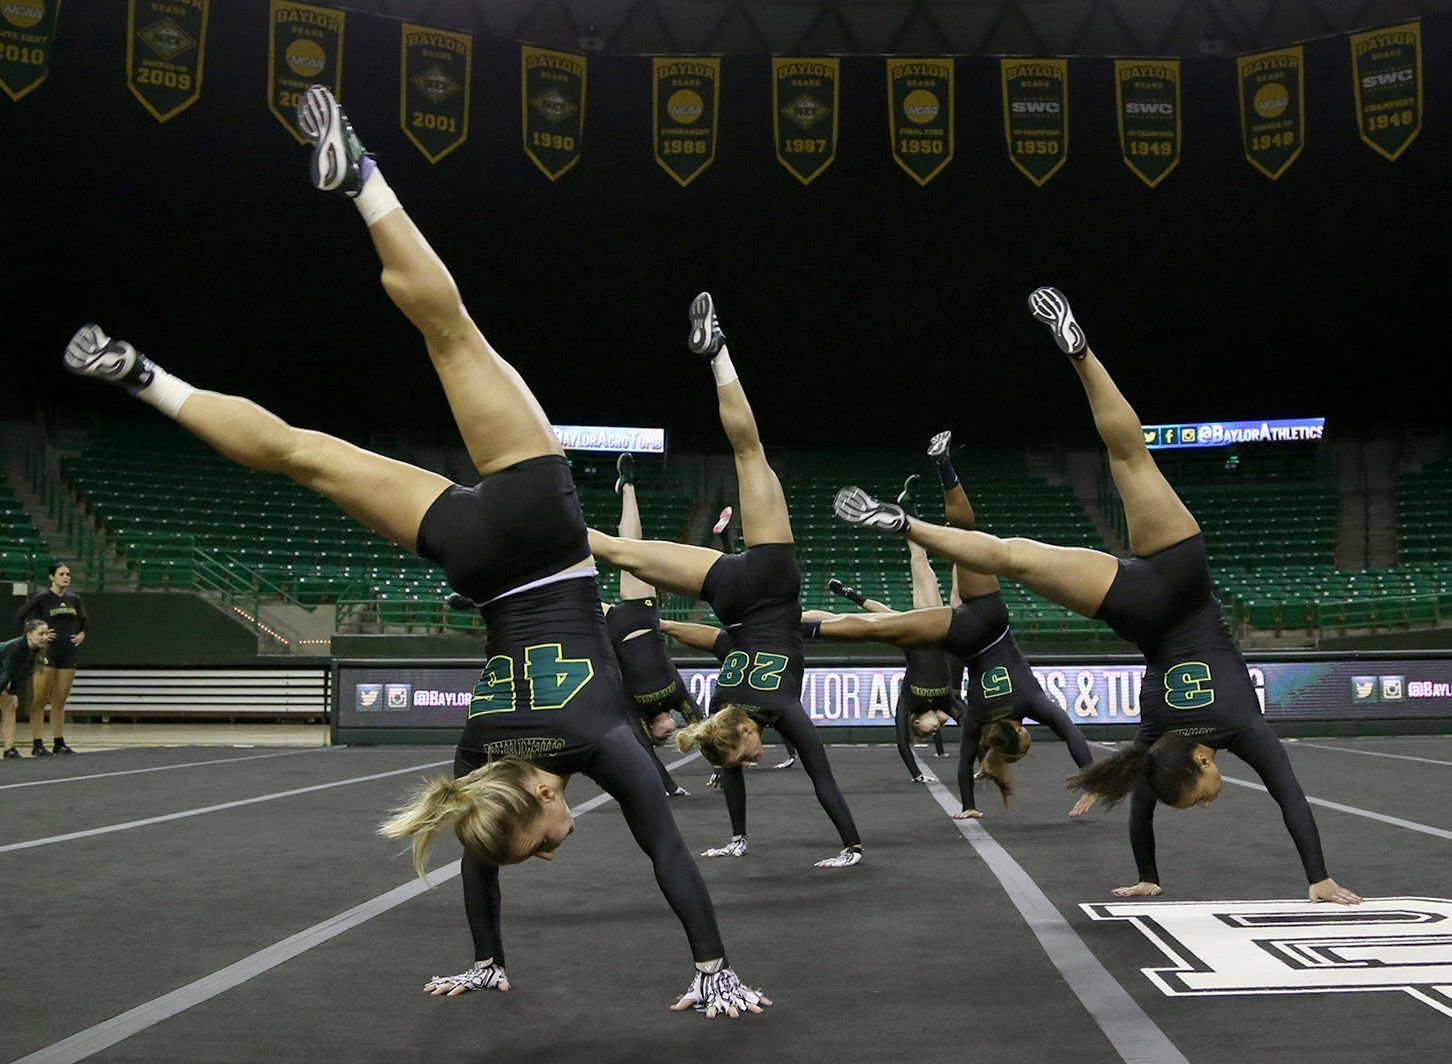 Top-ranked Baylor acrobatics/tumbling team peaking at right time for nationals ...1452 x 1064